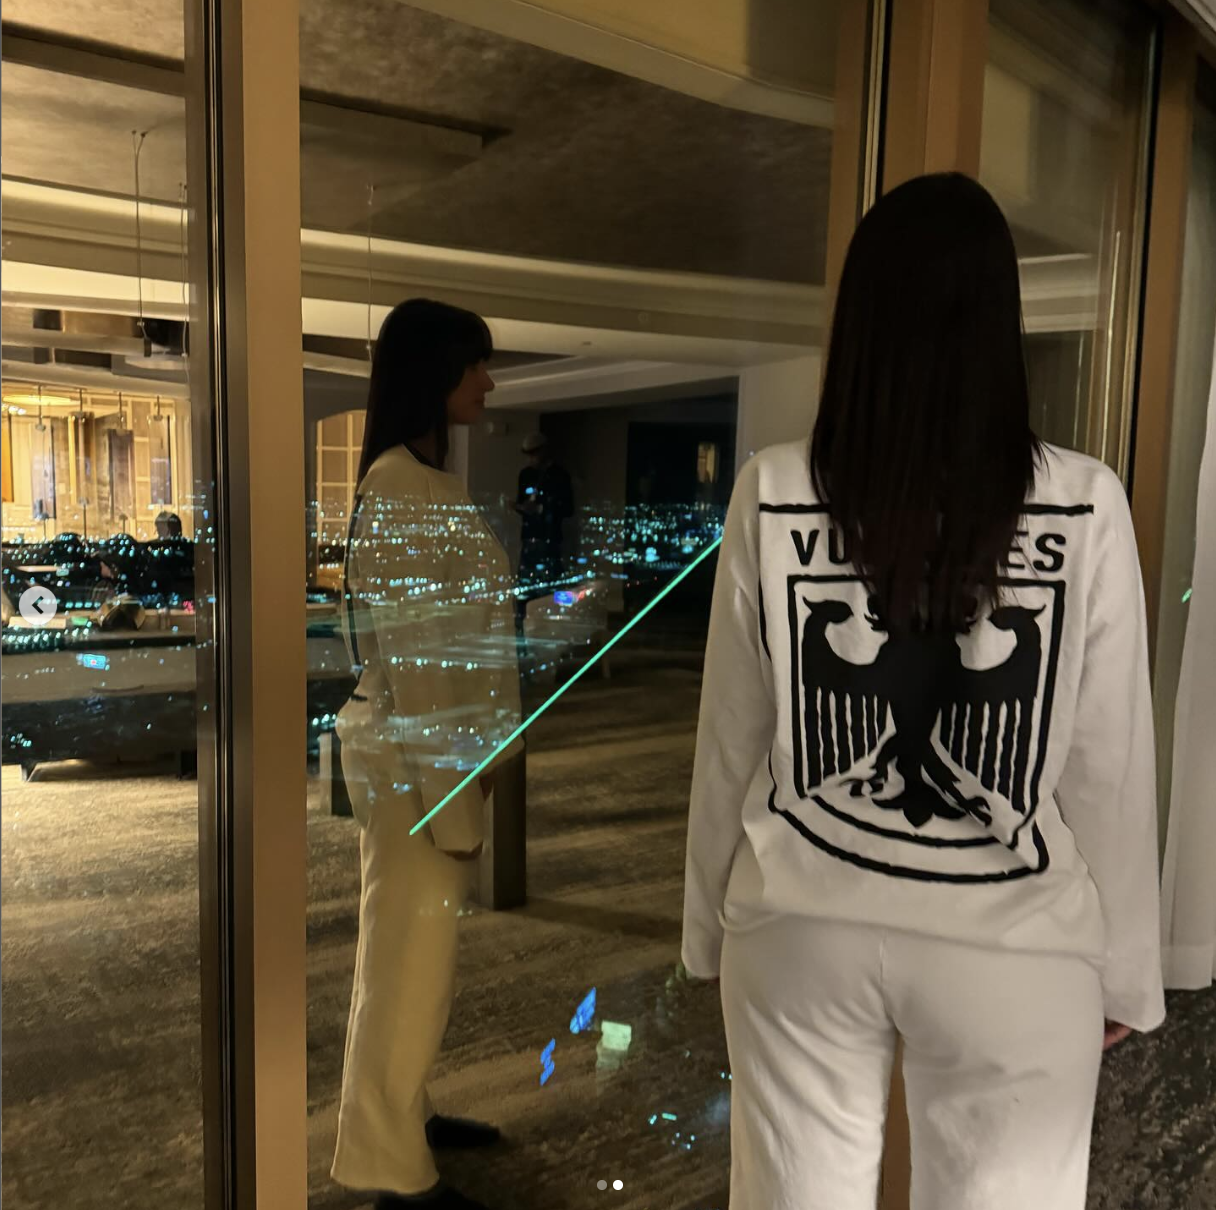 Woman in a white jacket with &quot;VOTES&quot; text at the back looks at her reflection in a window overlooking a city night view